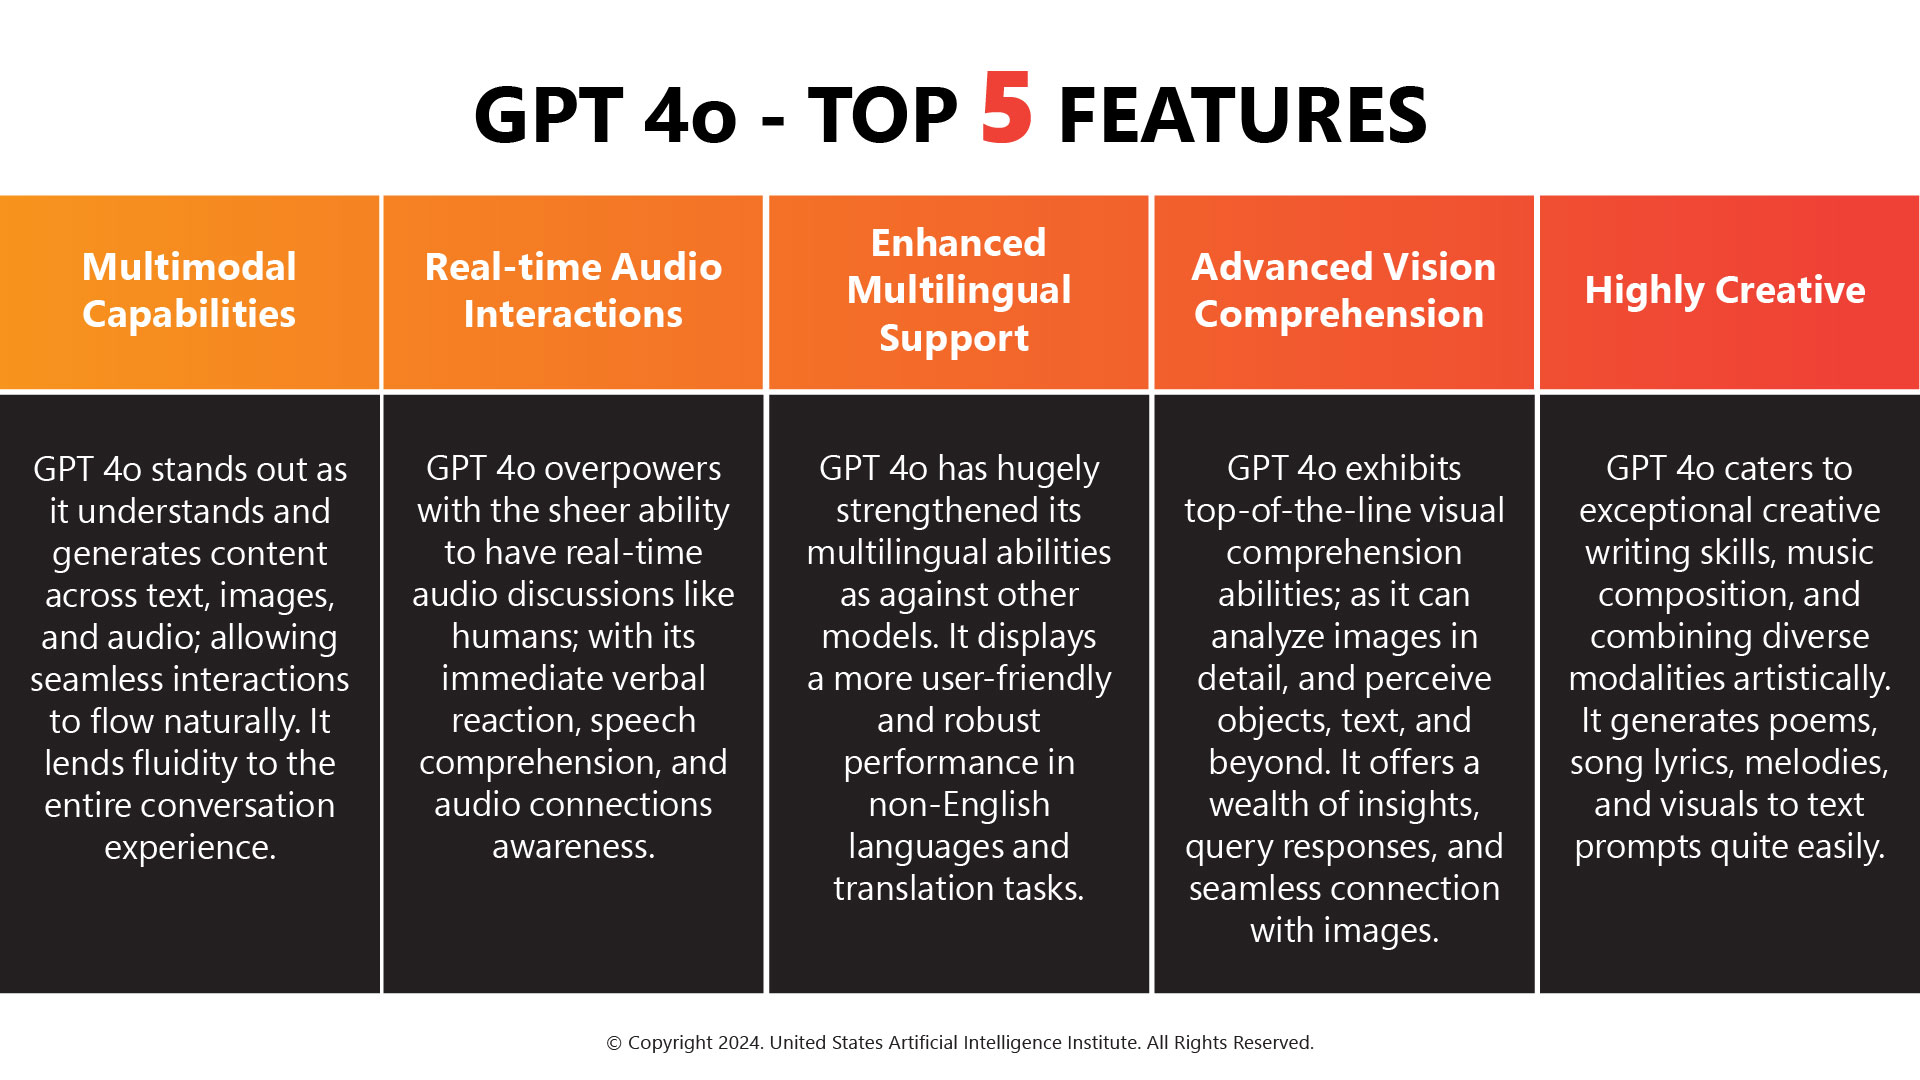 GPT 4o- Top 5 Features